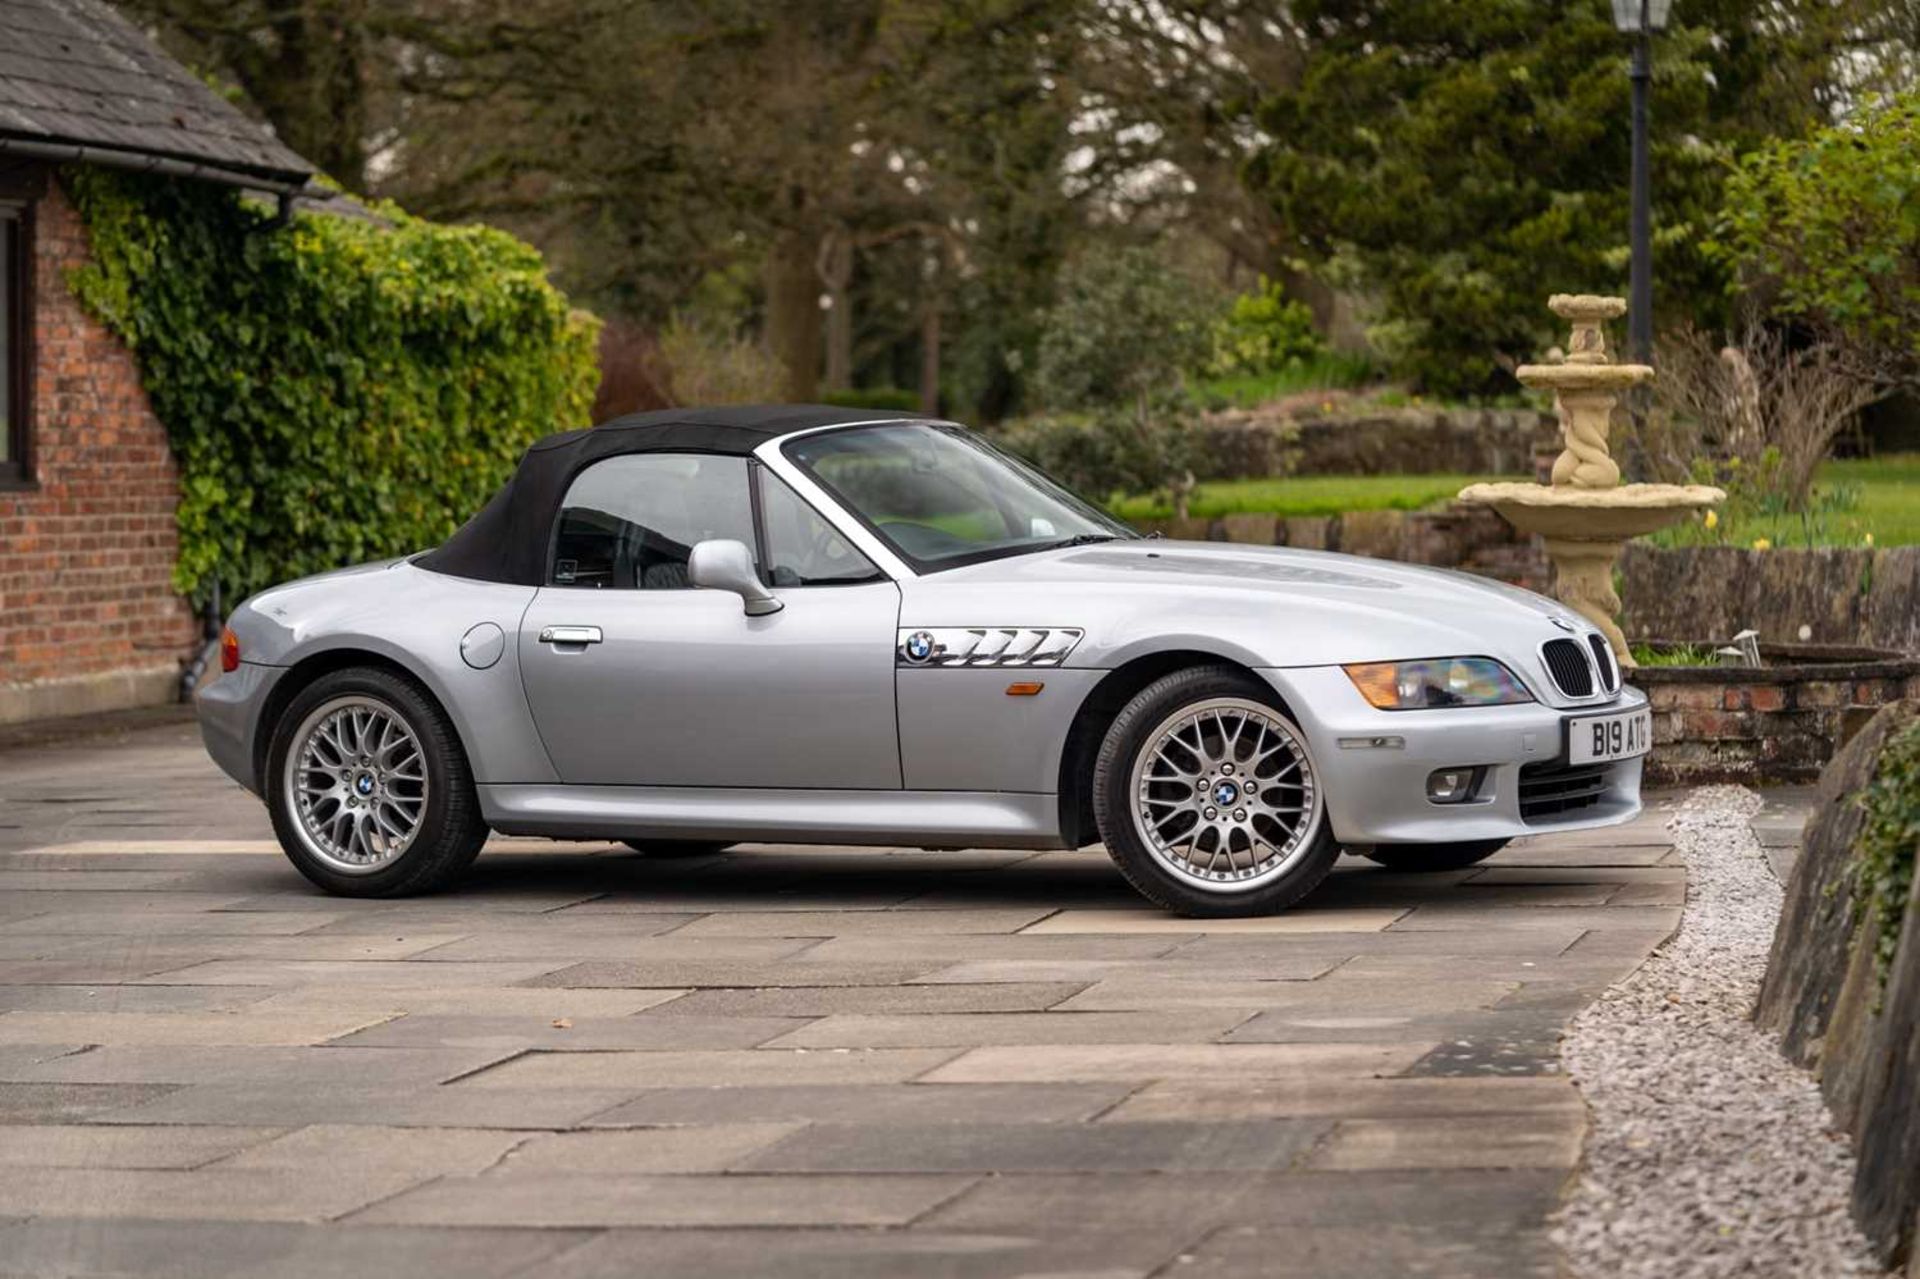 1997 BMW Z3 2.8 Same family ownership for 22 years, Desirable manual with 12 months MOT  - Image 7 of 66